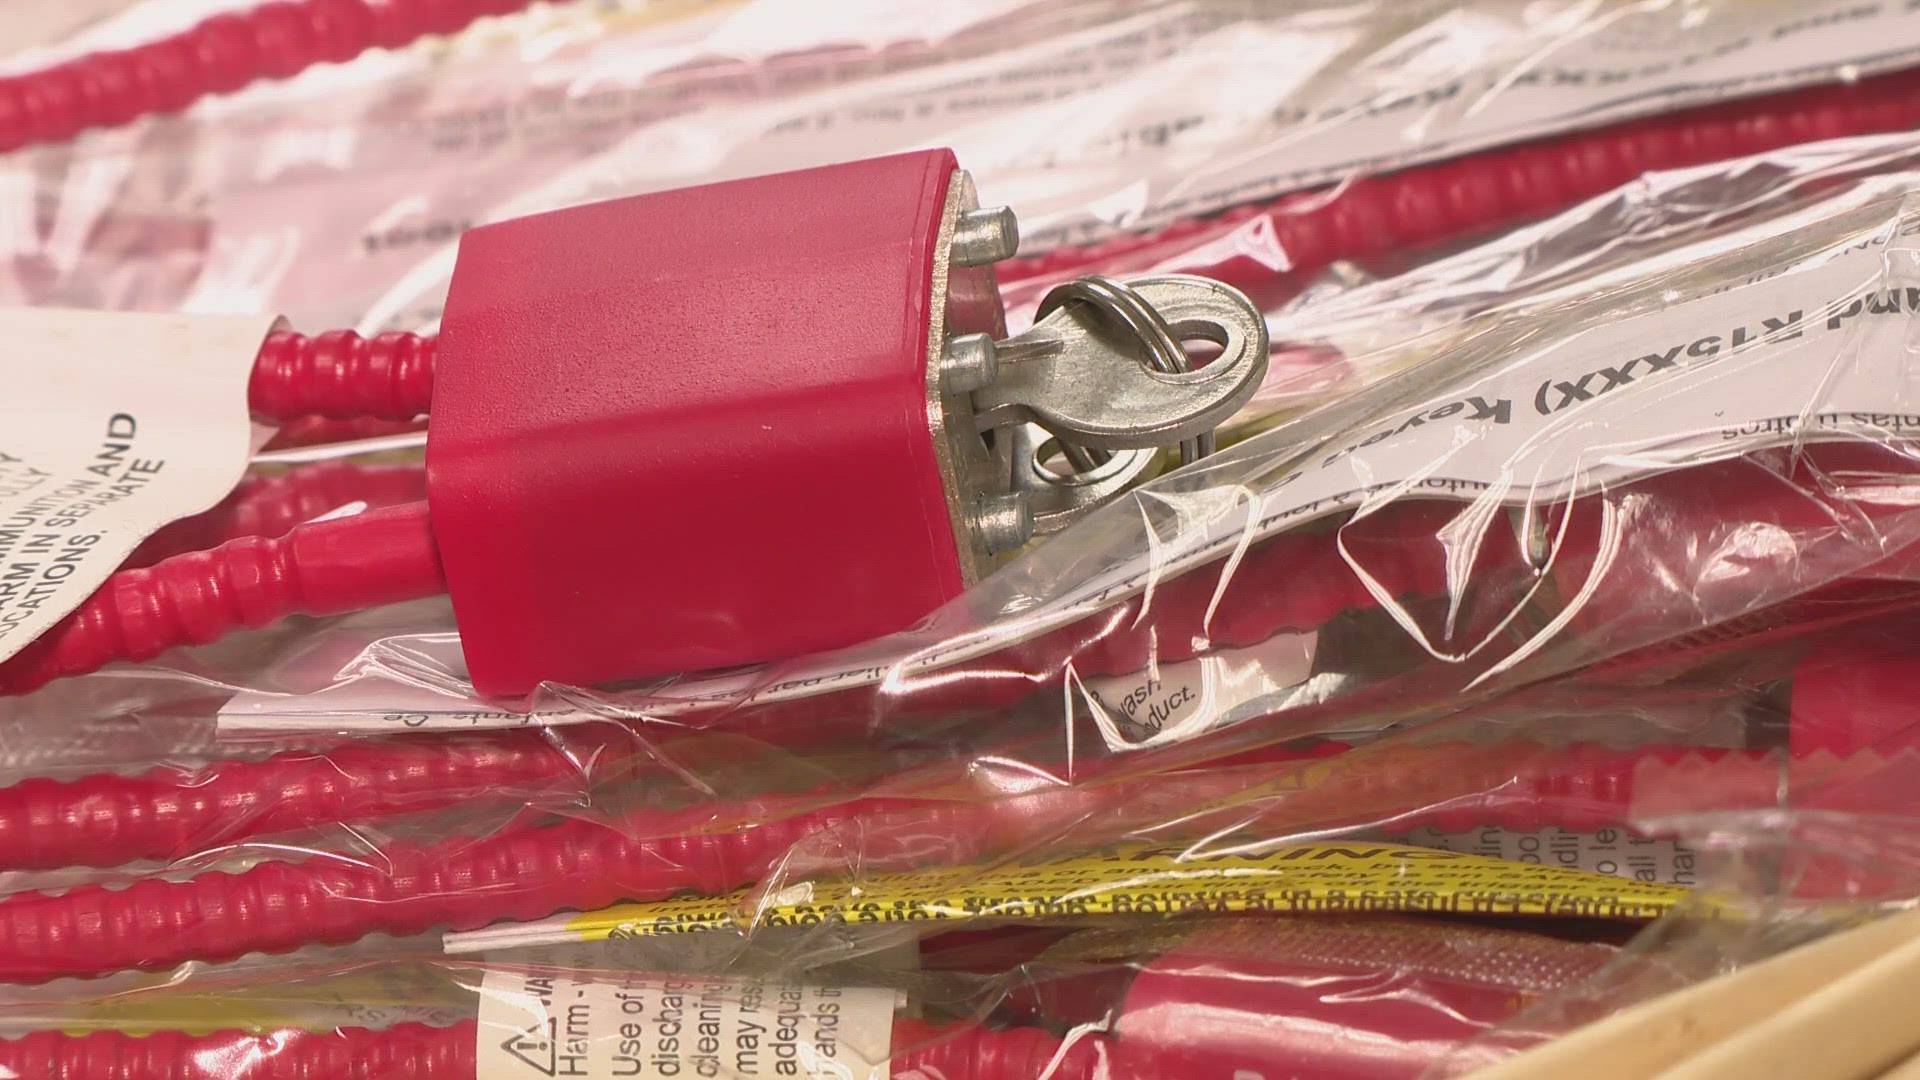 On Wear Orange Day, SSM Health is expanding access to free gun locks. The hospital system is hoping to give away 11,000 free gun locks.